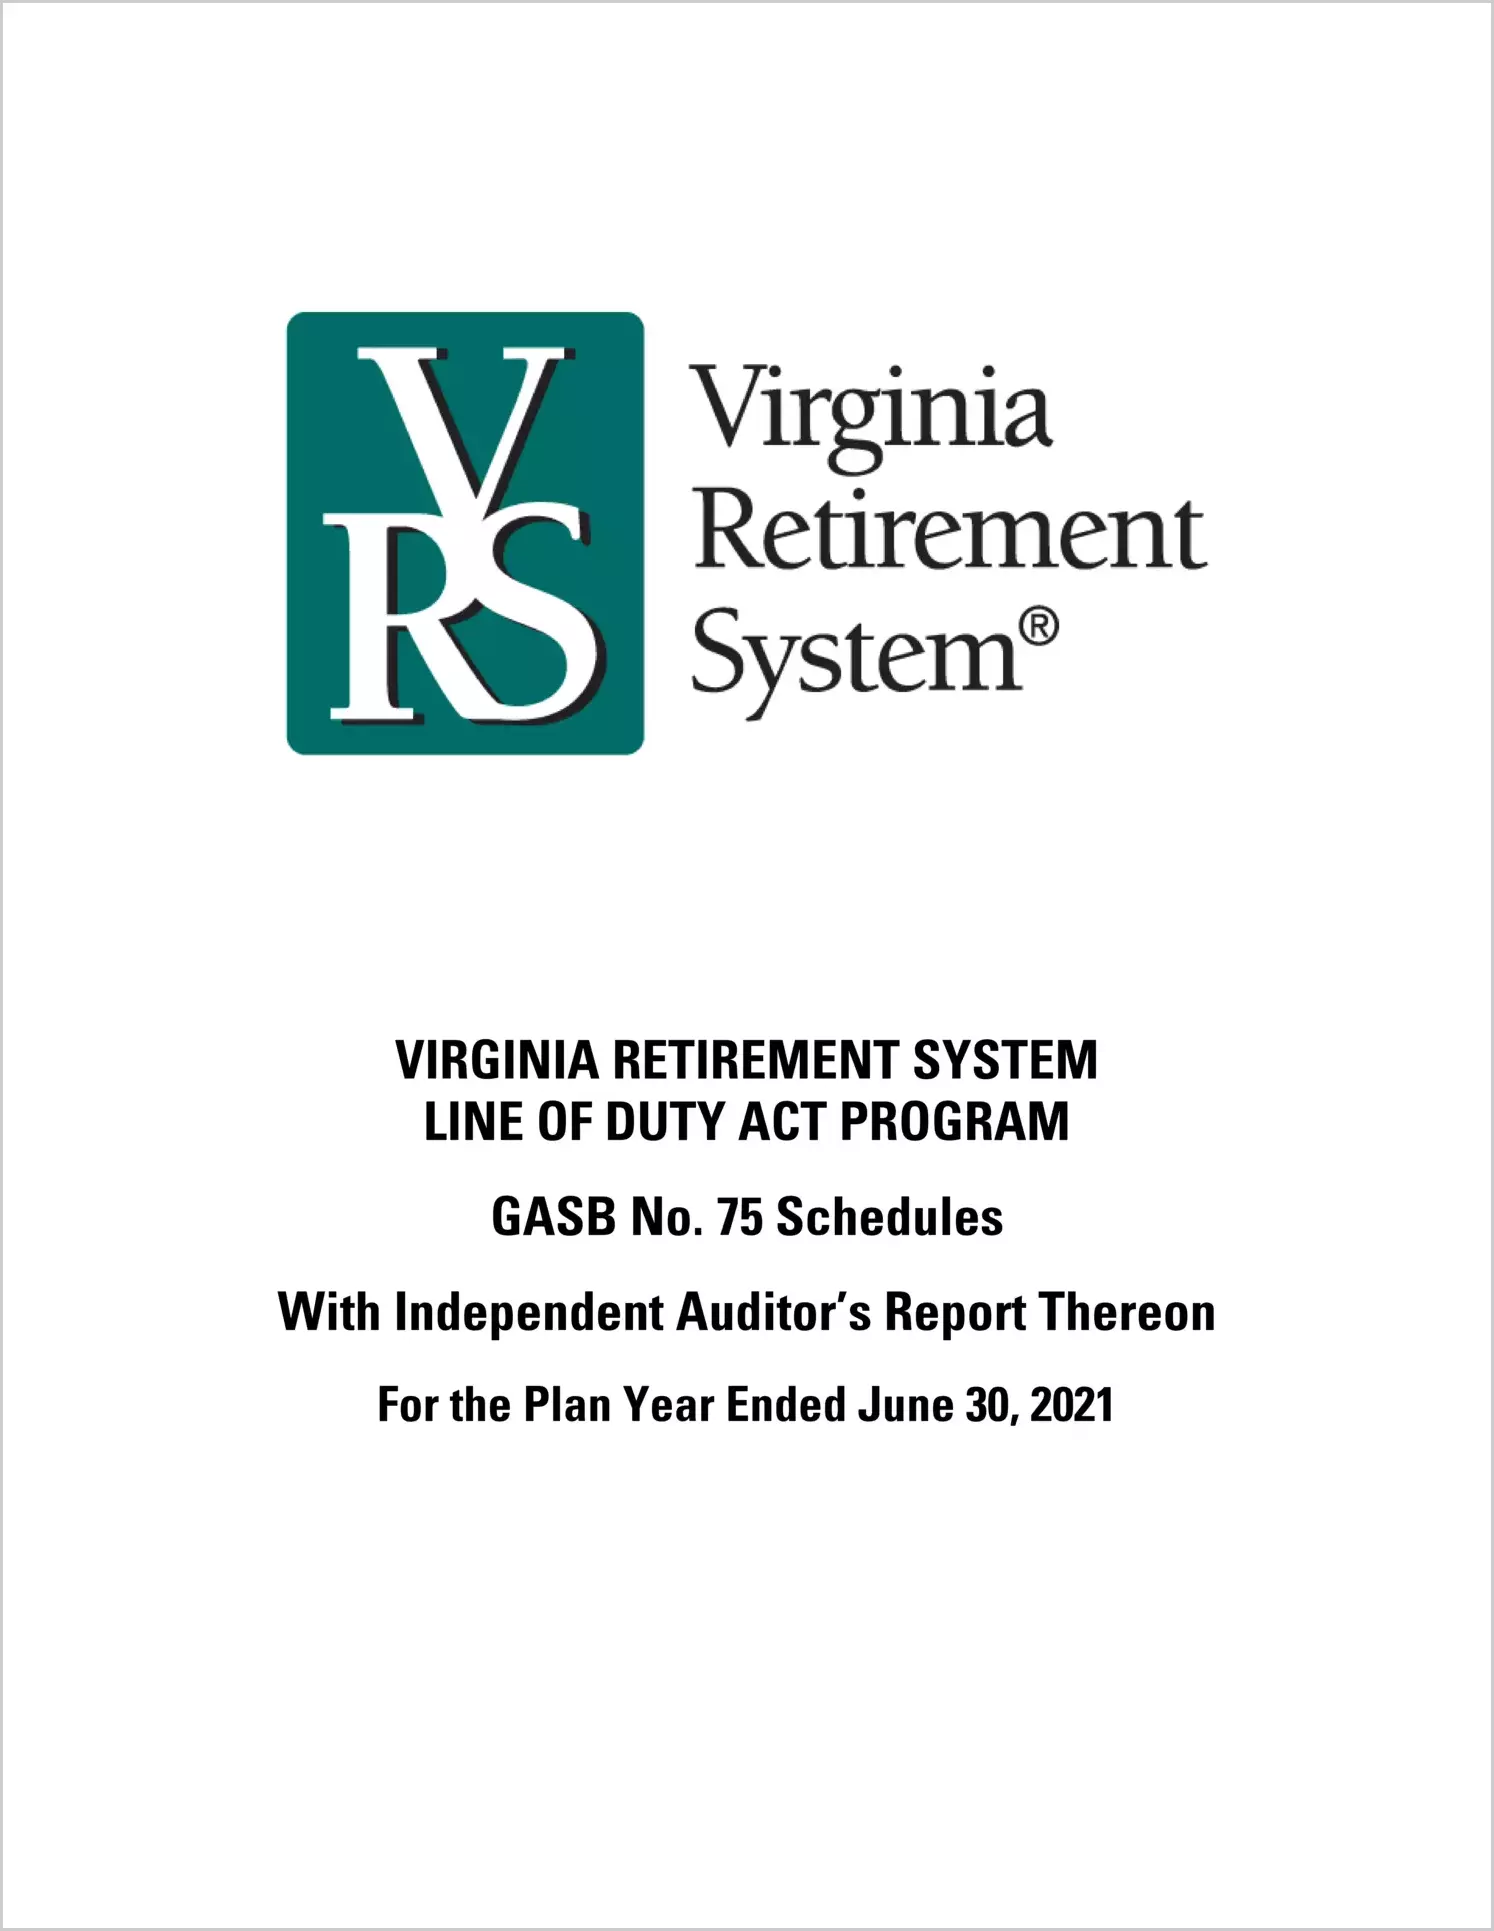 GASB 75 Schedules - Virginia Retirement System Line of Duty Act Program for the year ended June 30, 2021